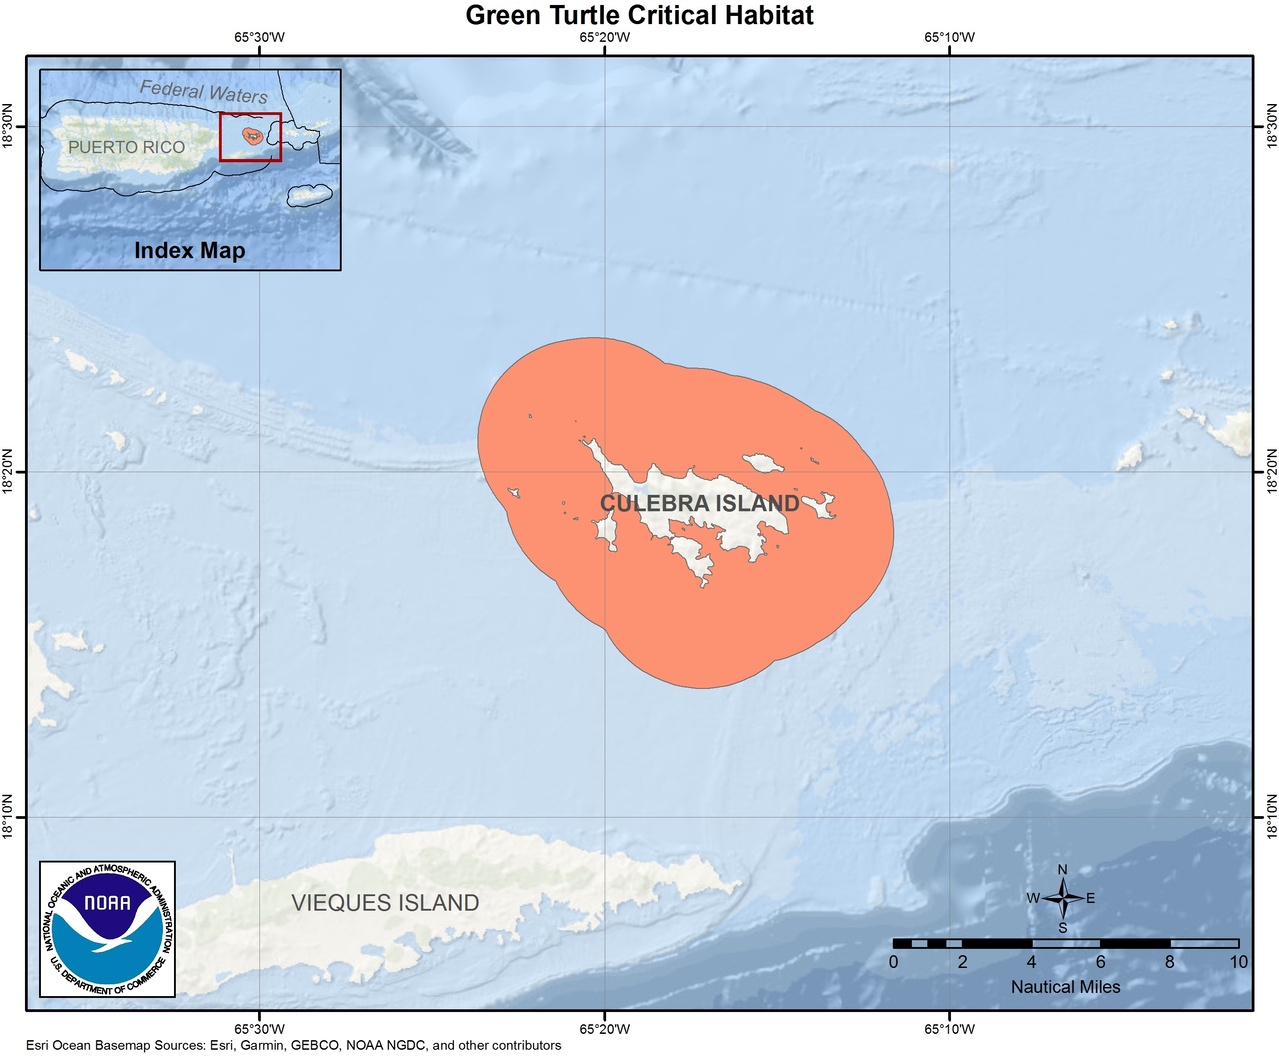 Image: Green Turtle Critical Habitat Map and GIS Data